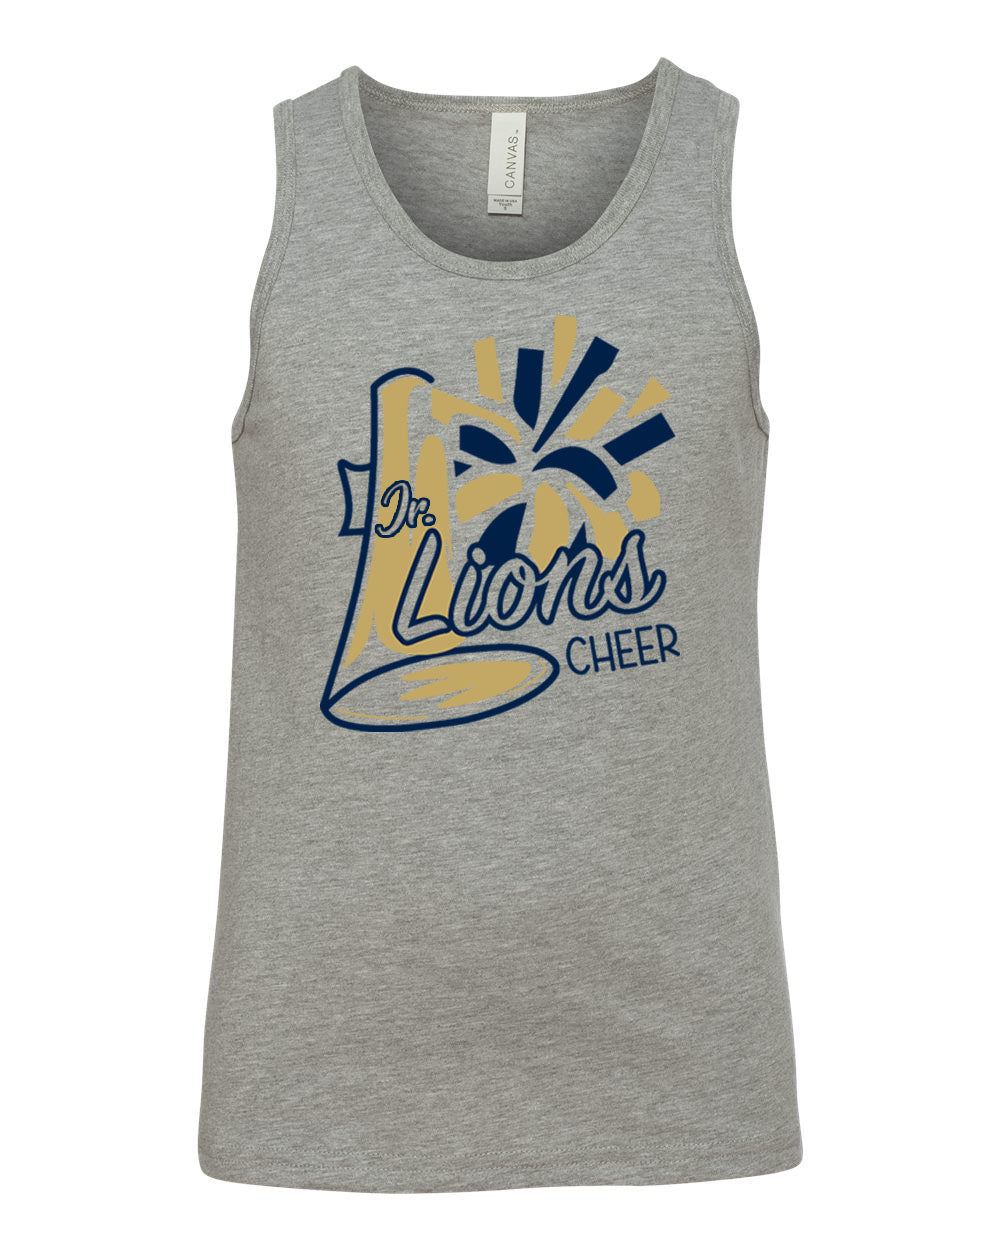 Lions Cheer design 2 Muscle Tank Top